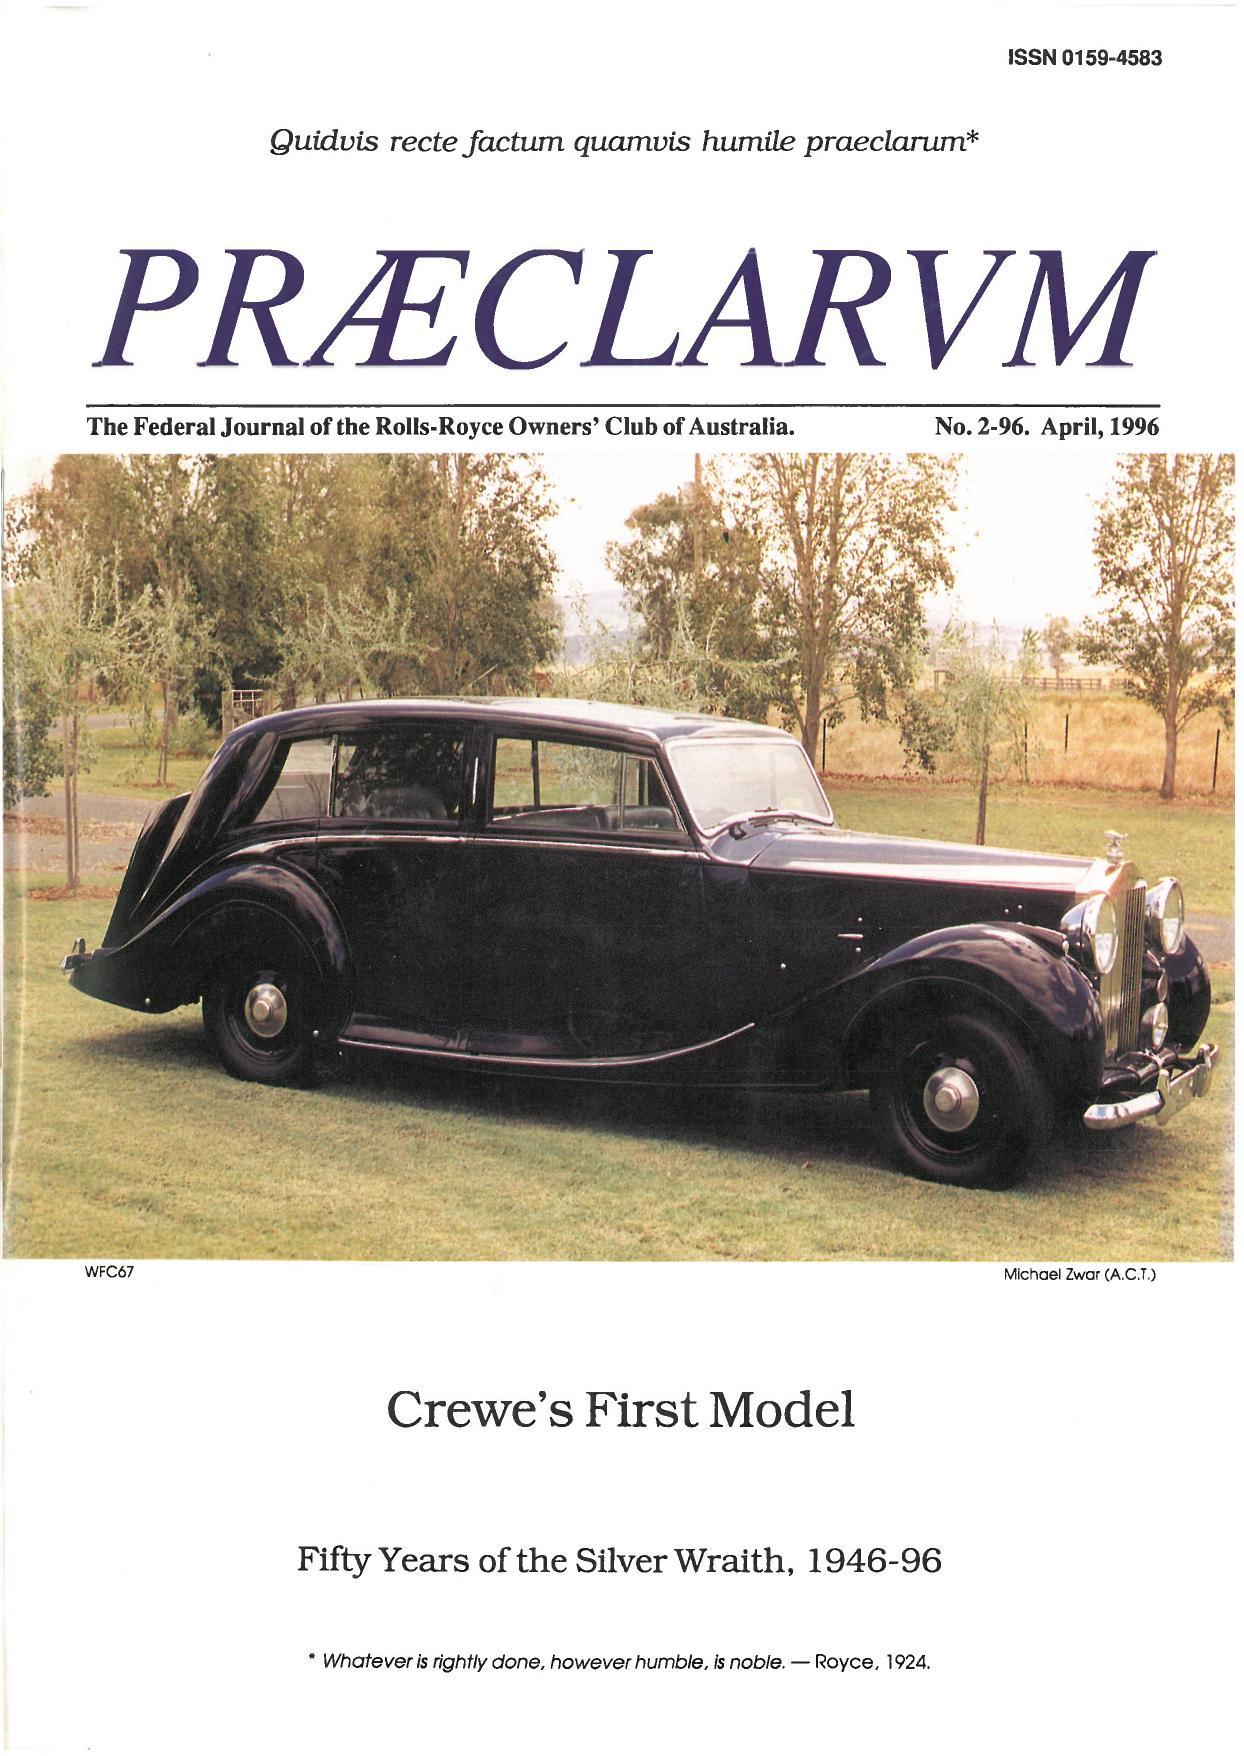 preclarvm-the-federal-journal-of-the-rolls-royce-owners-club-of-australia-no-2-96-april-1996.pdf